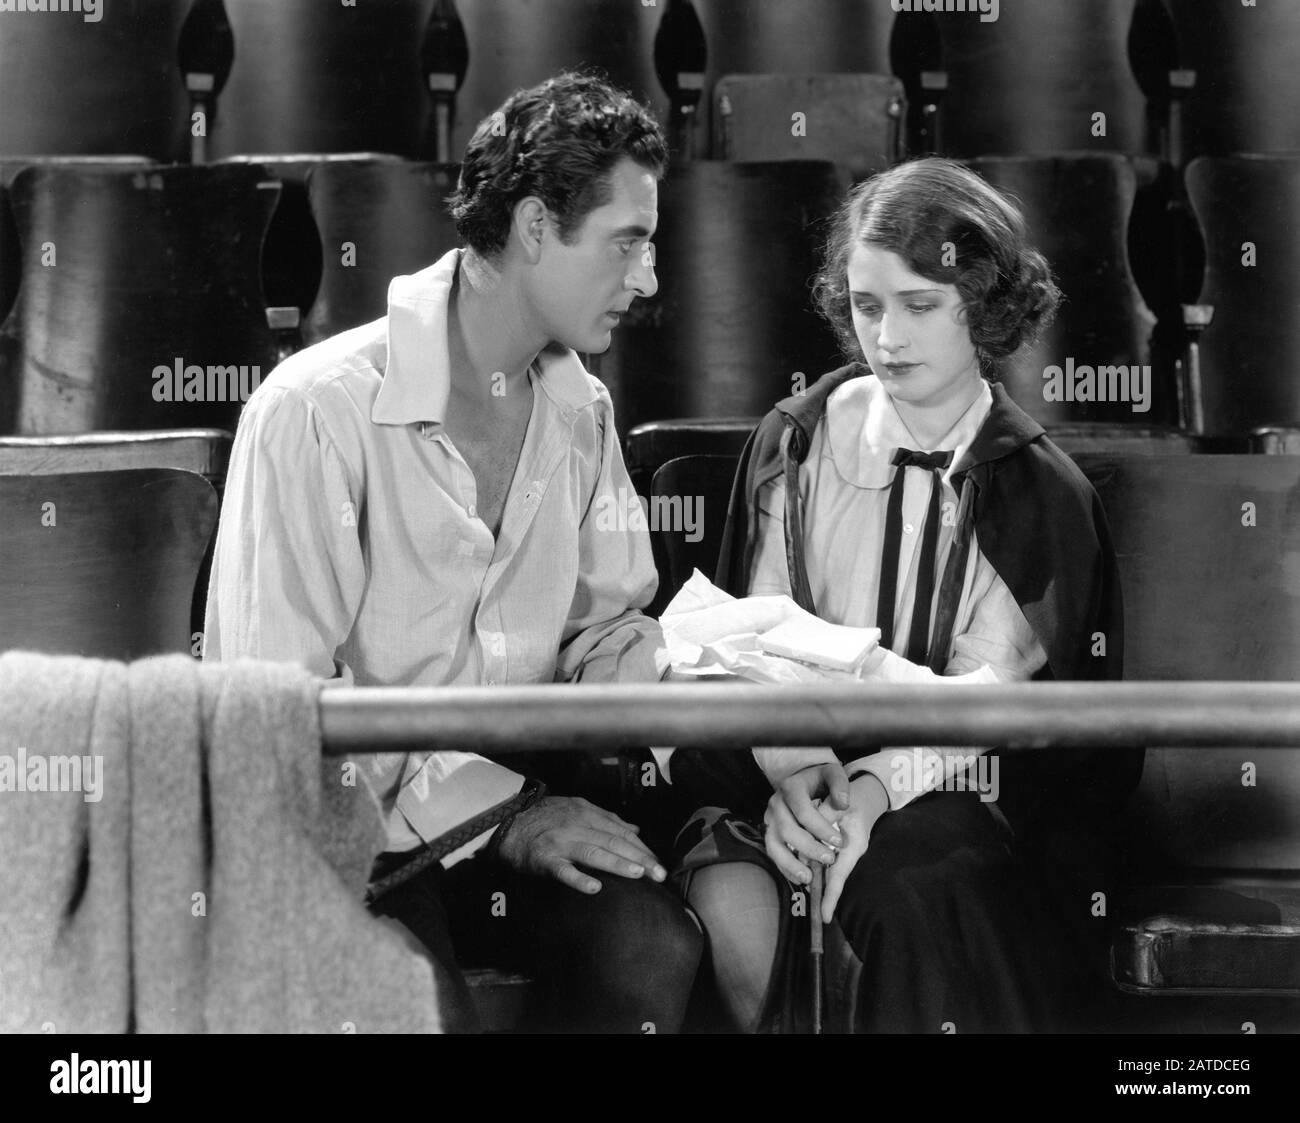 JOHN GILBERT and NORMA SHEARER in HE WHO GETS SLAPPED 1924 director VICTOR SEASTROM / SJOSTROM from play by Leonid Andreyev Silent movie producer LOUIS B. MAYER Metro - Goldwyn Pictures Corporation Stock Photo